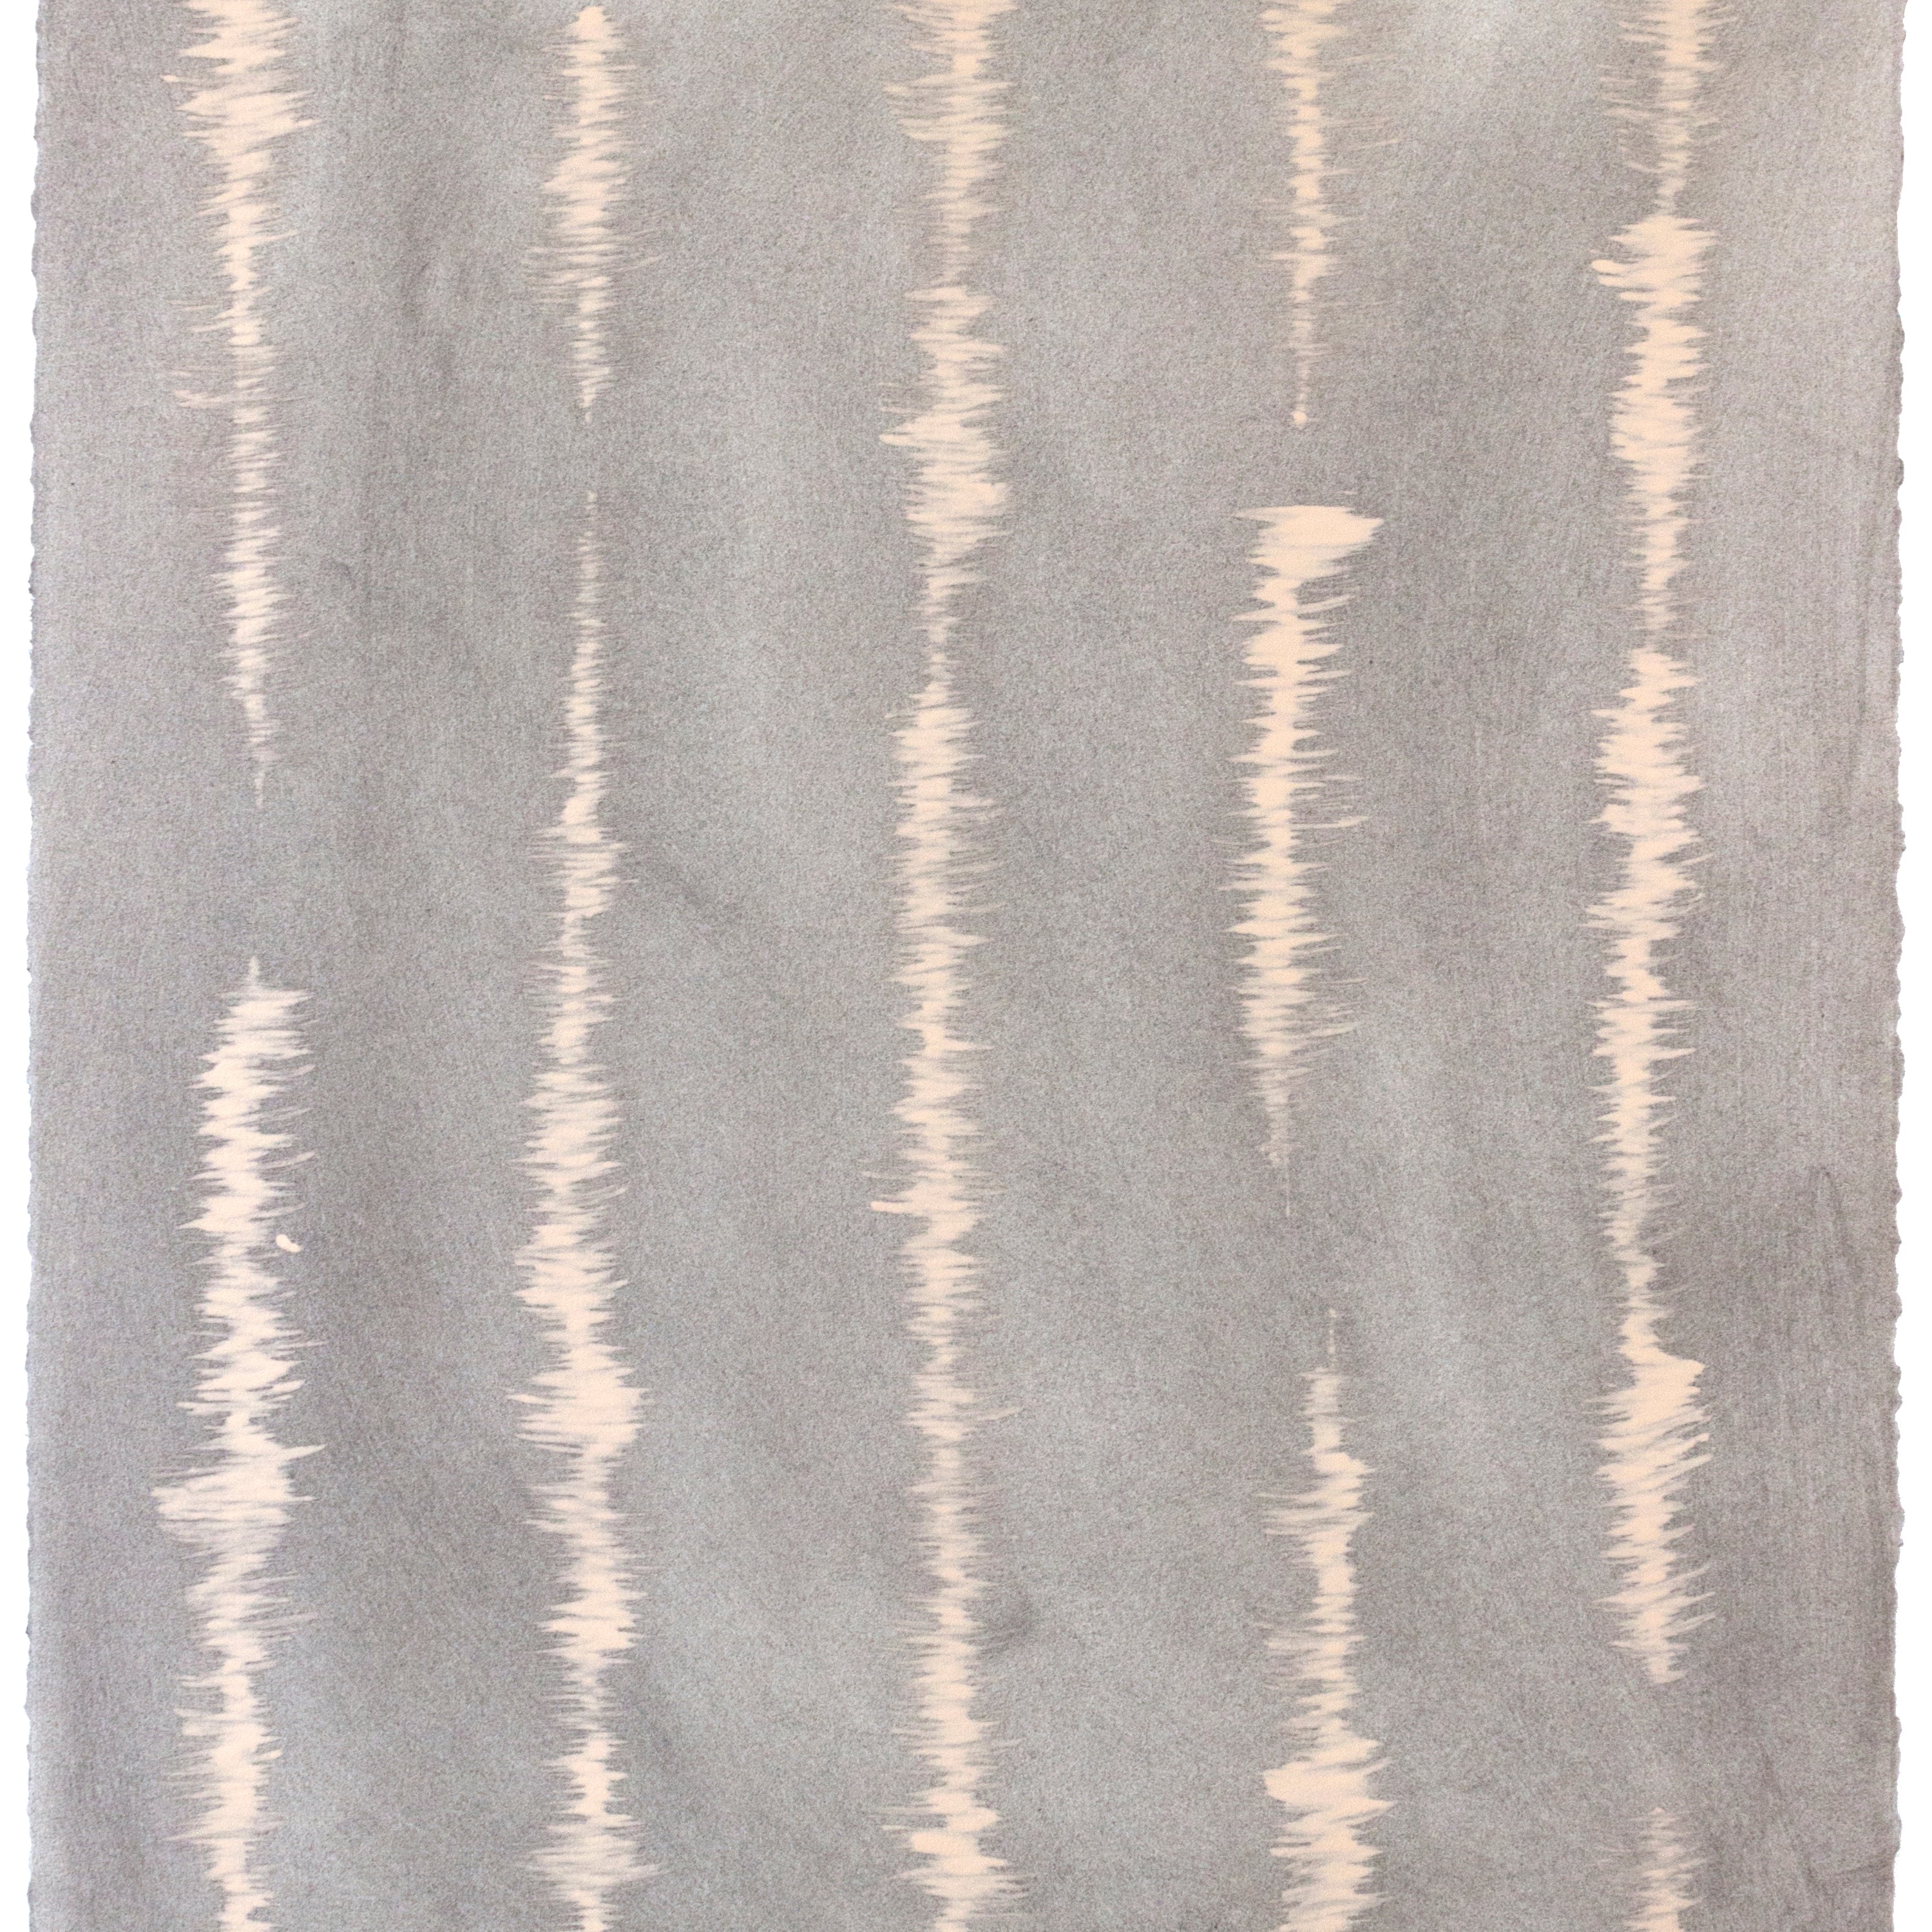 Sheet of hand-painted wallpaper with an irregular vibrating linear pattern in peach on a greige field.